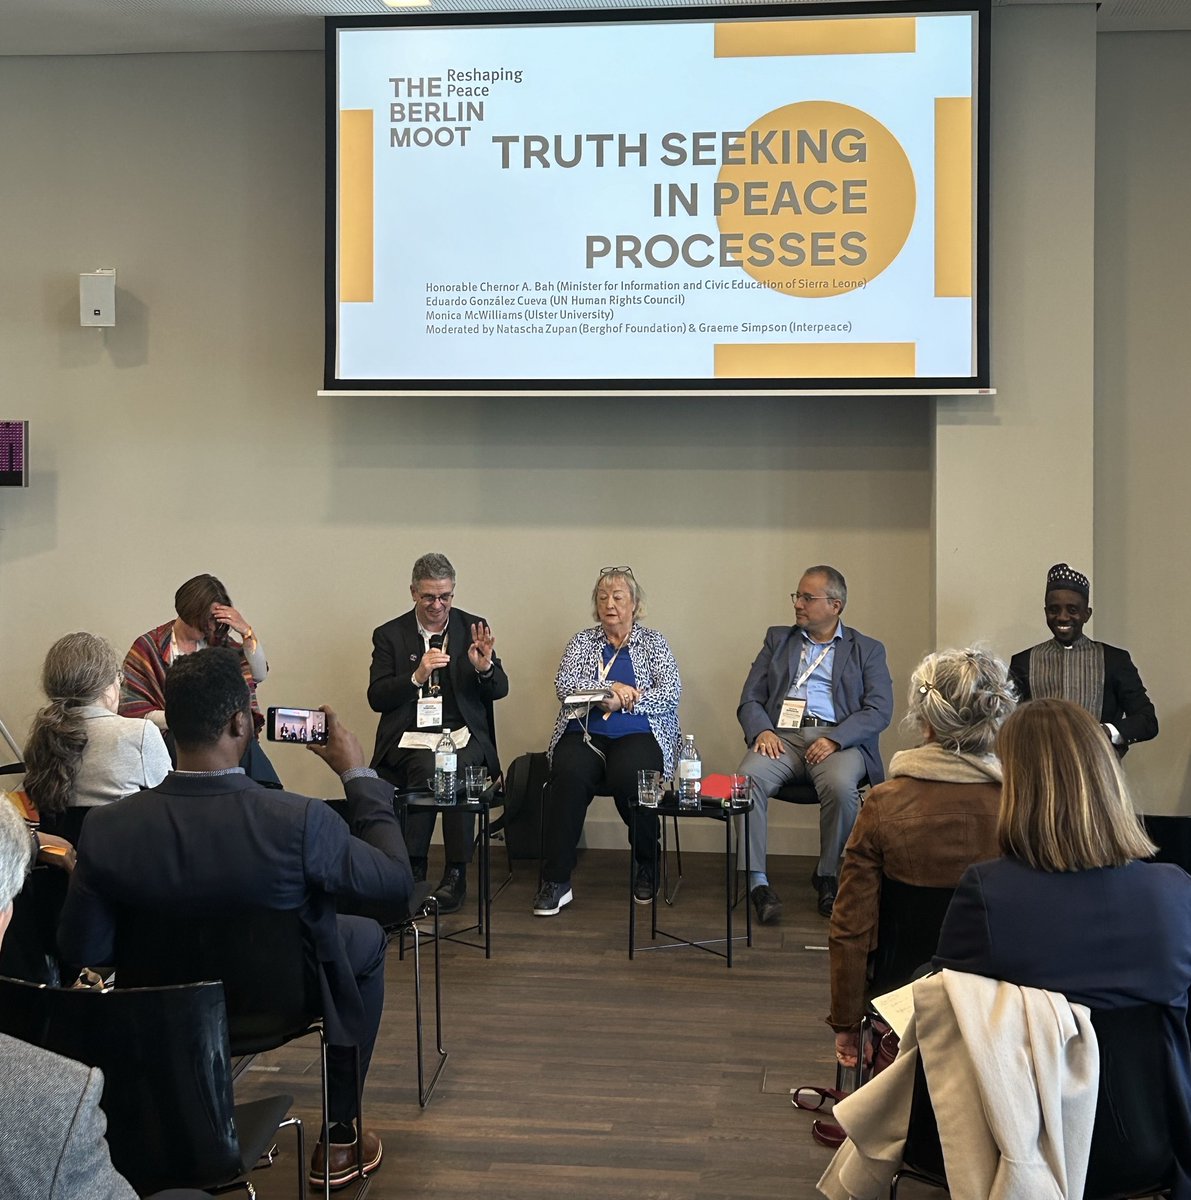 How do societies come to terms with their violent past? At today's panel event at #TheBerlinMoot, speakers talked about how transitional justice processes are crucial for peace & fostering inclusive societies, highlighting cases in #NorthernIreland, #SierraLeone & #SouthAfrica.